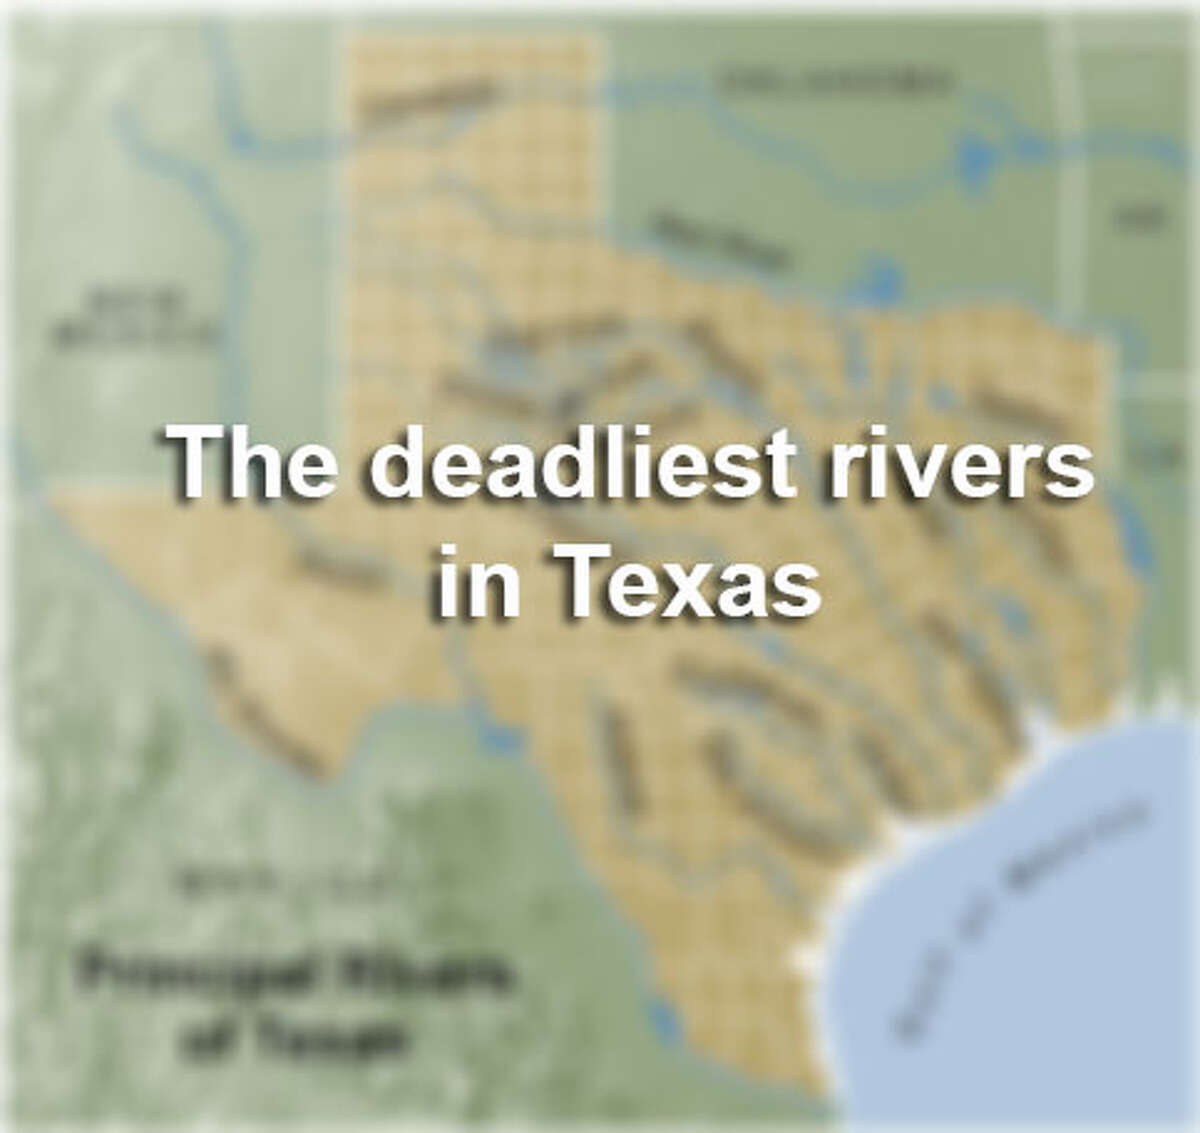 At least 125 people died on rivers in Texas since 2010. Explore this gallery to see the 12 rivers in the Lone Star State that have had more than two reported deaths since 2010. Explore this Express-News database for all 125 deaths sorted by river, cause and date.